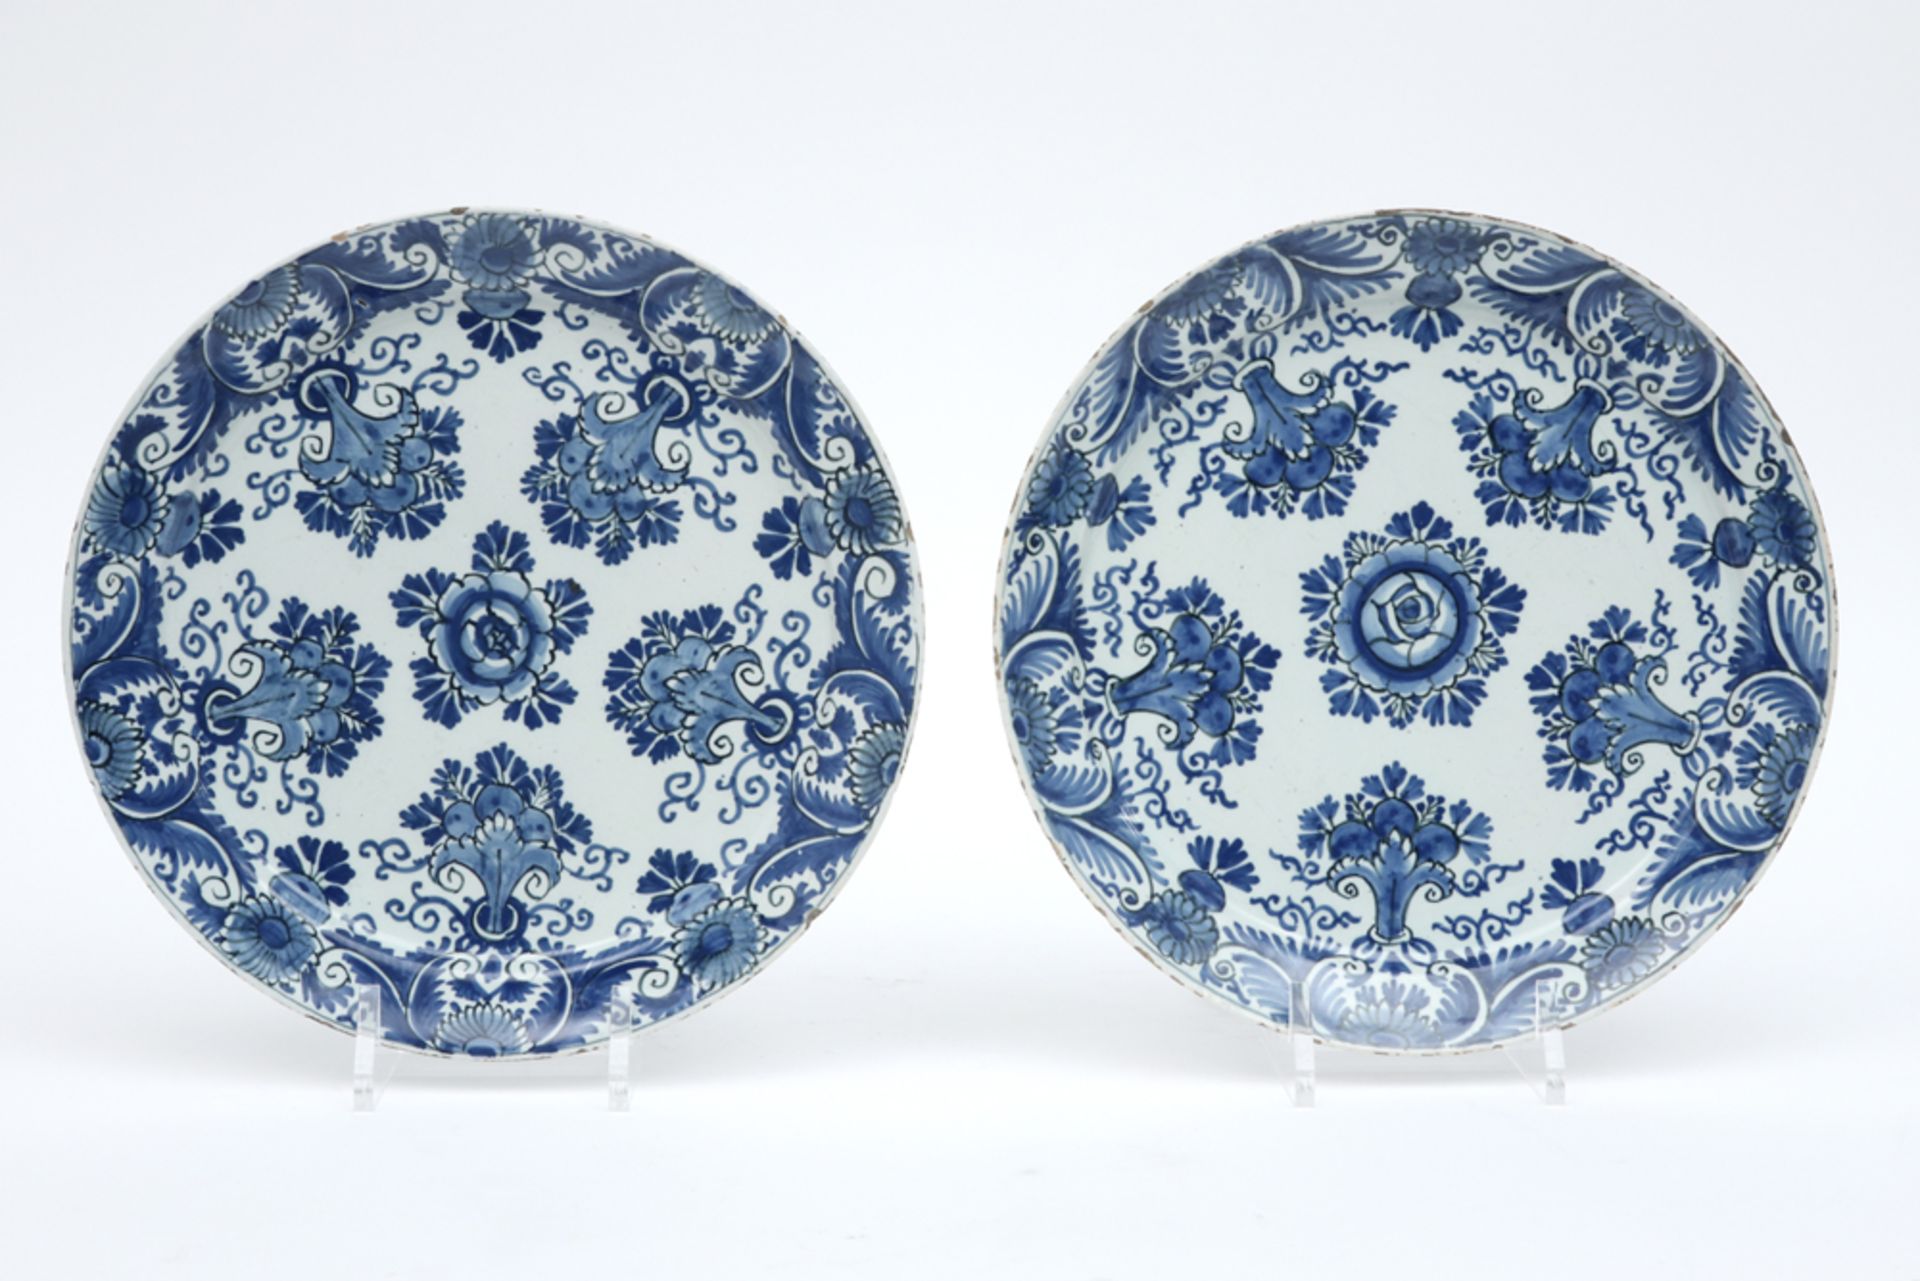 pair of 18th Cent. pancake plates in ceramic from Delft with a blue-white decor || Paar achttiende